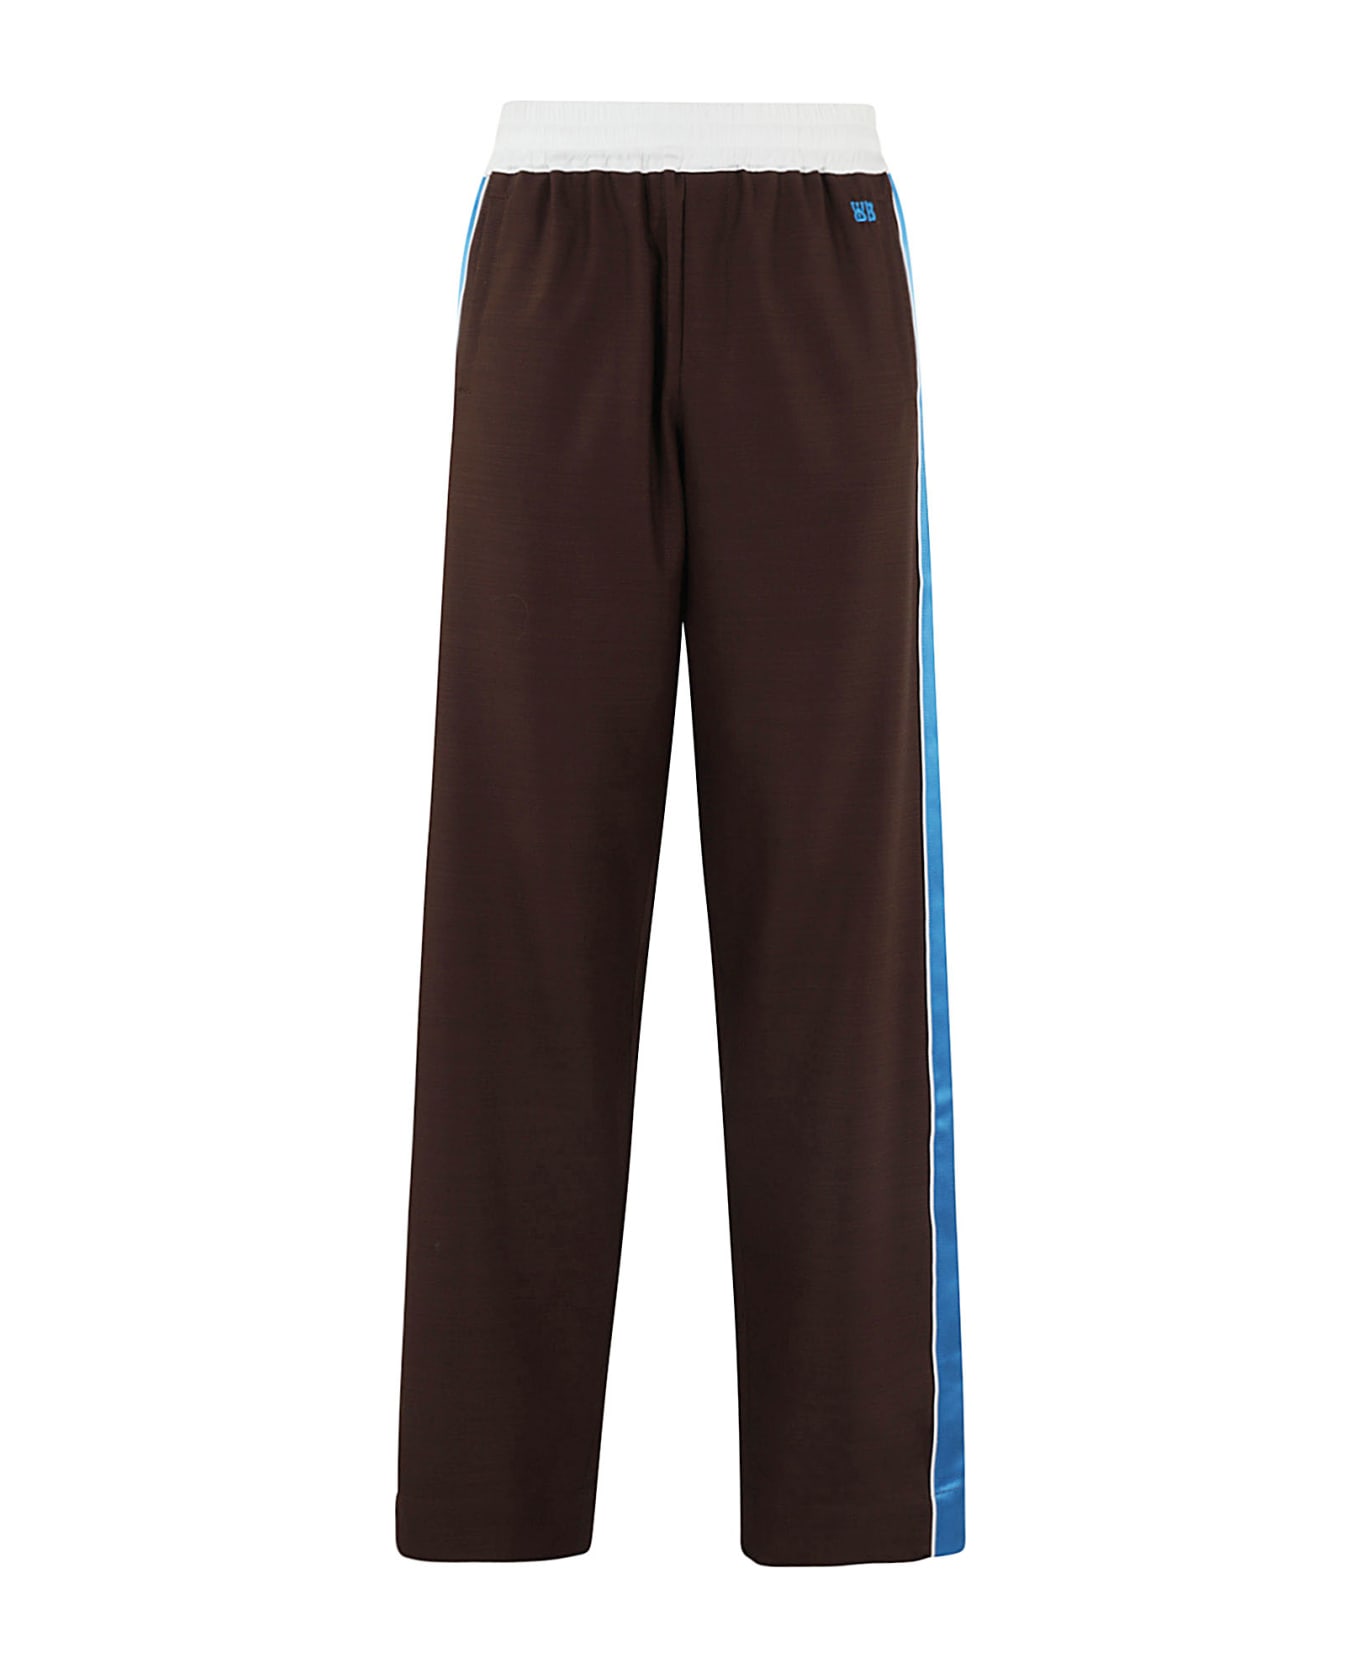 Wales Bonner Courage Trousers - Dark Brown And Blue